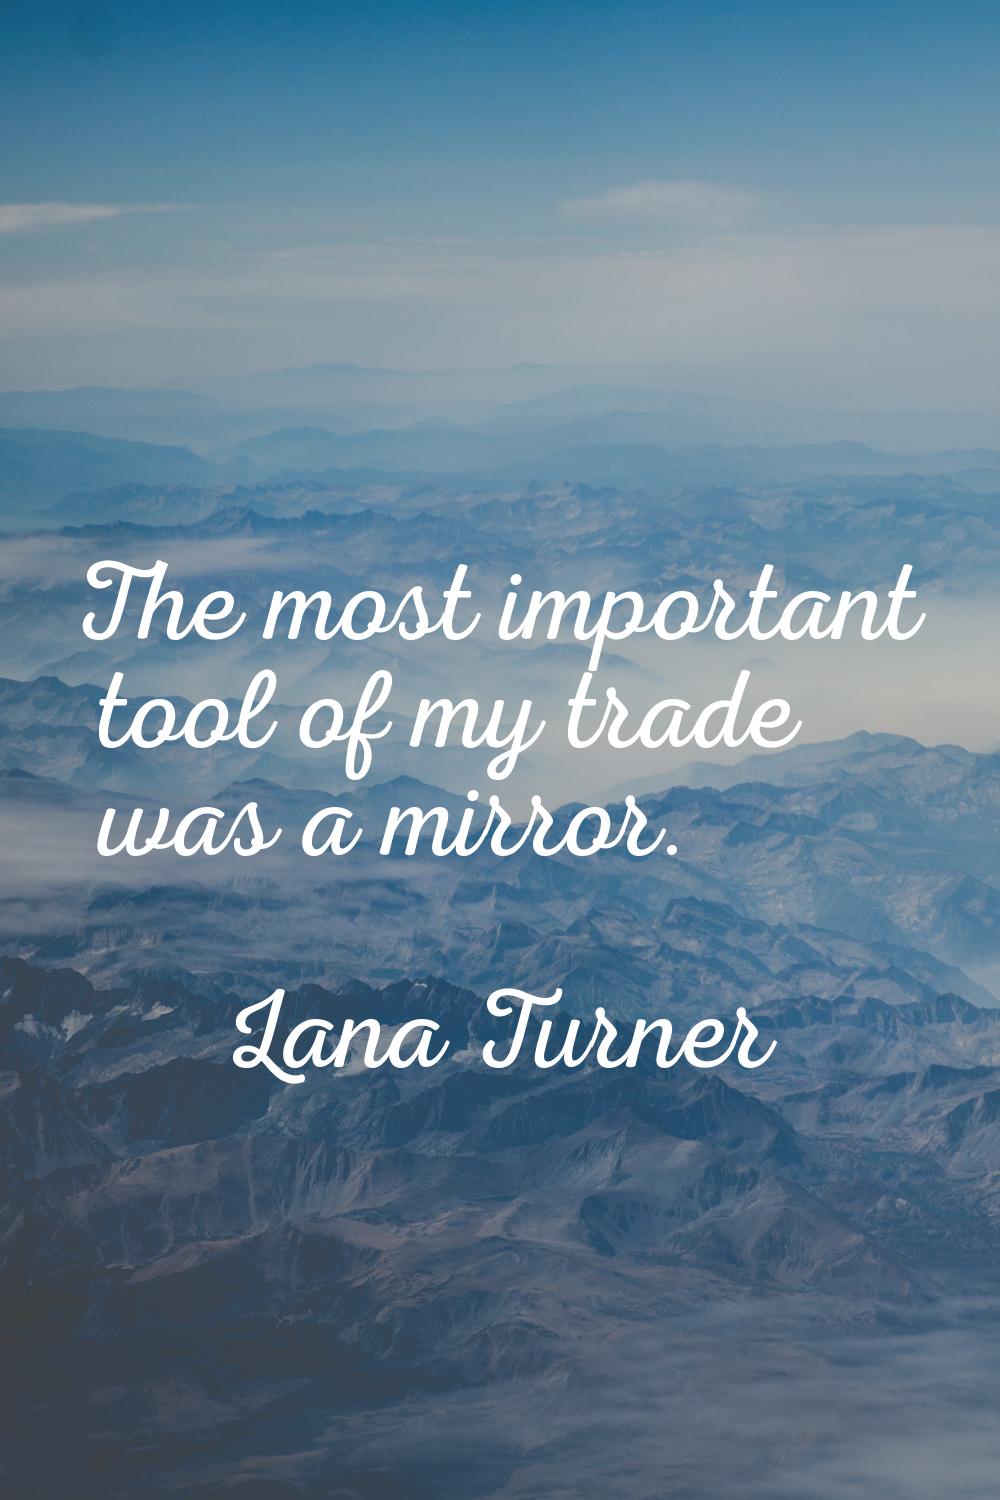 The most important tool of my trade was a mirror.